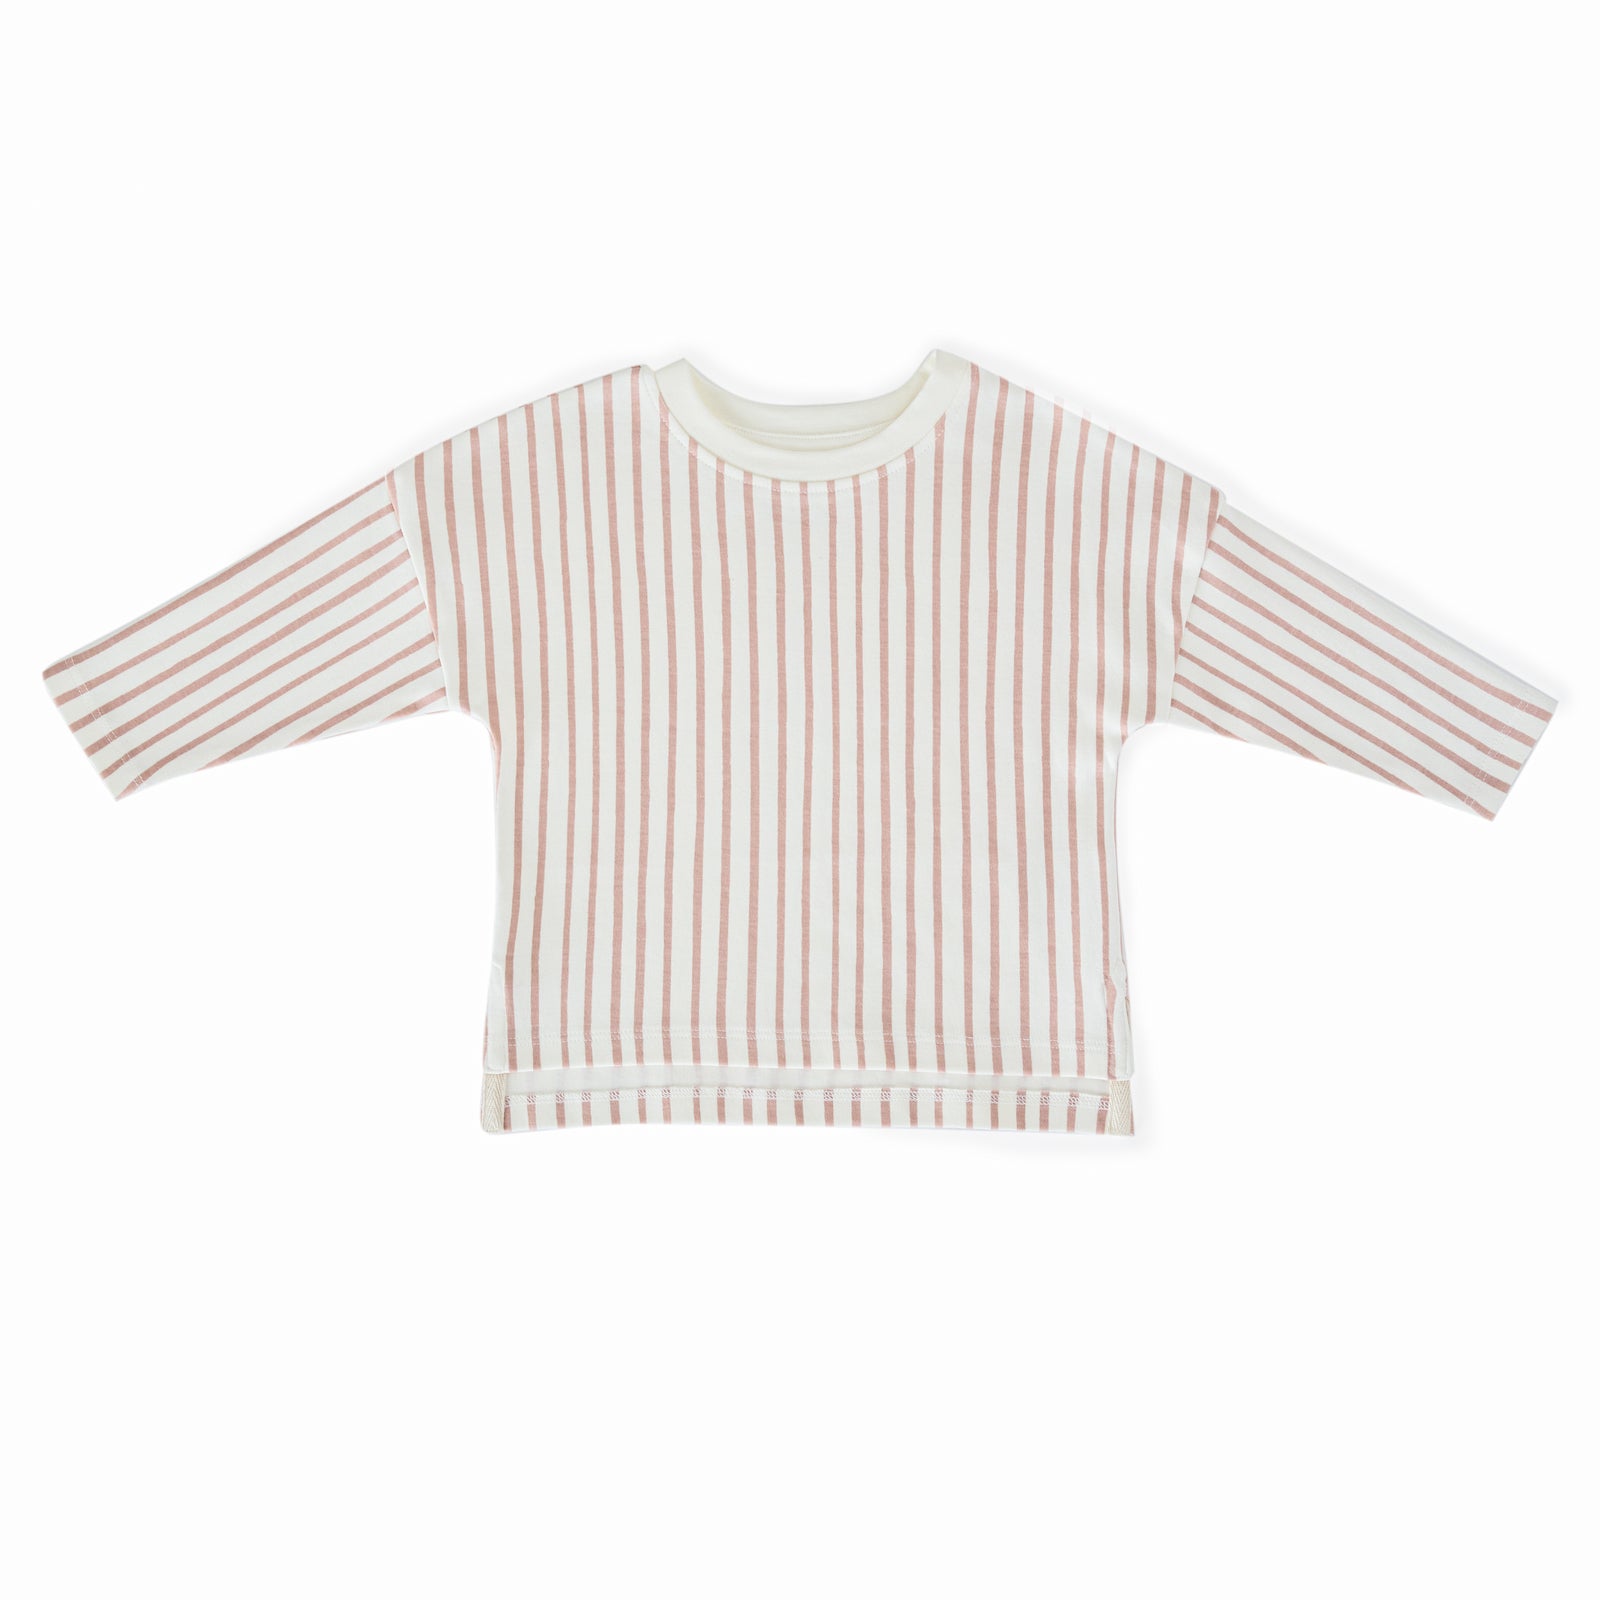 Dropped Shoulder Long Sleeve Top Pehr Stripes Away Peony 18 - 24 mos. 